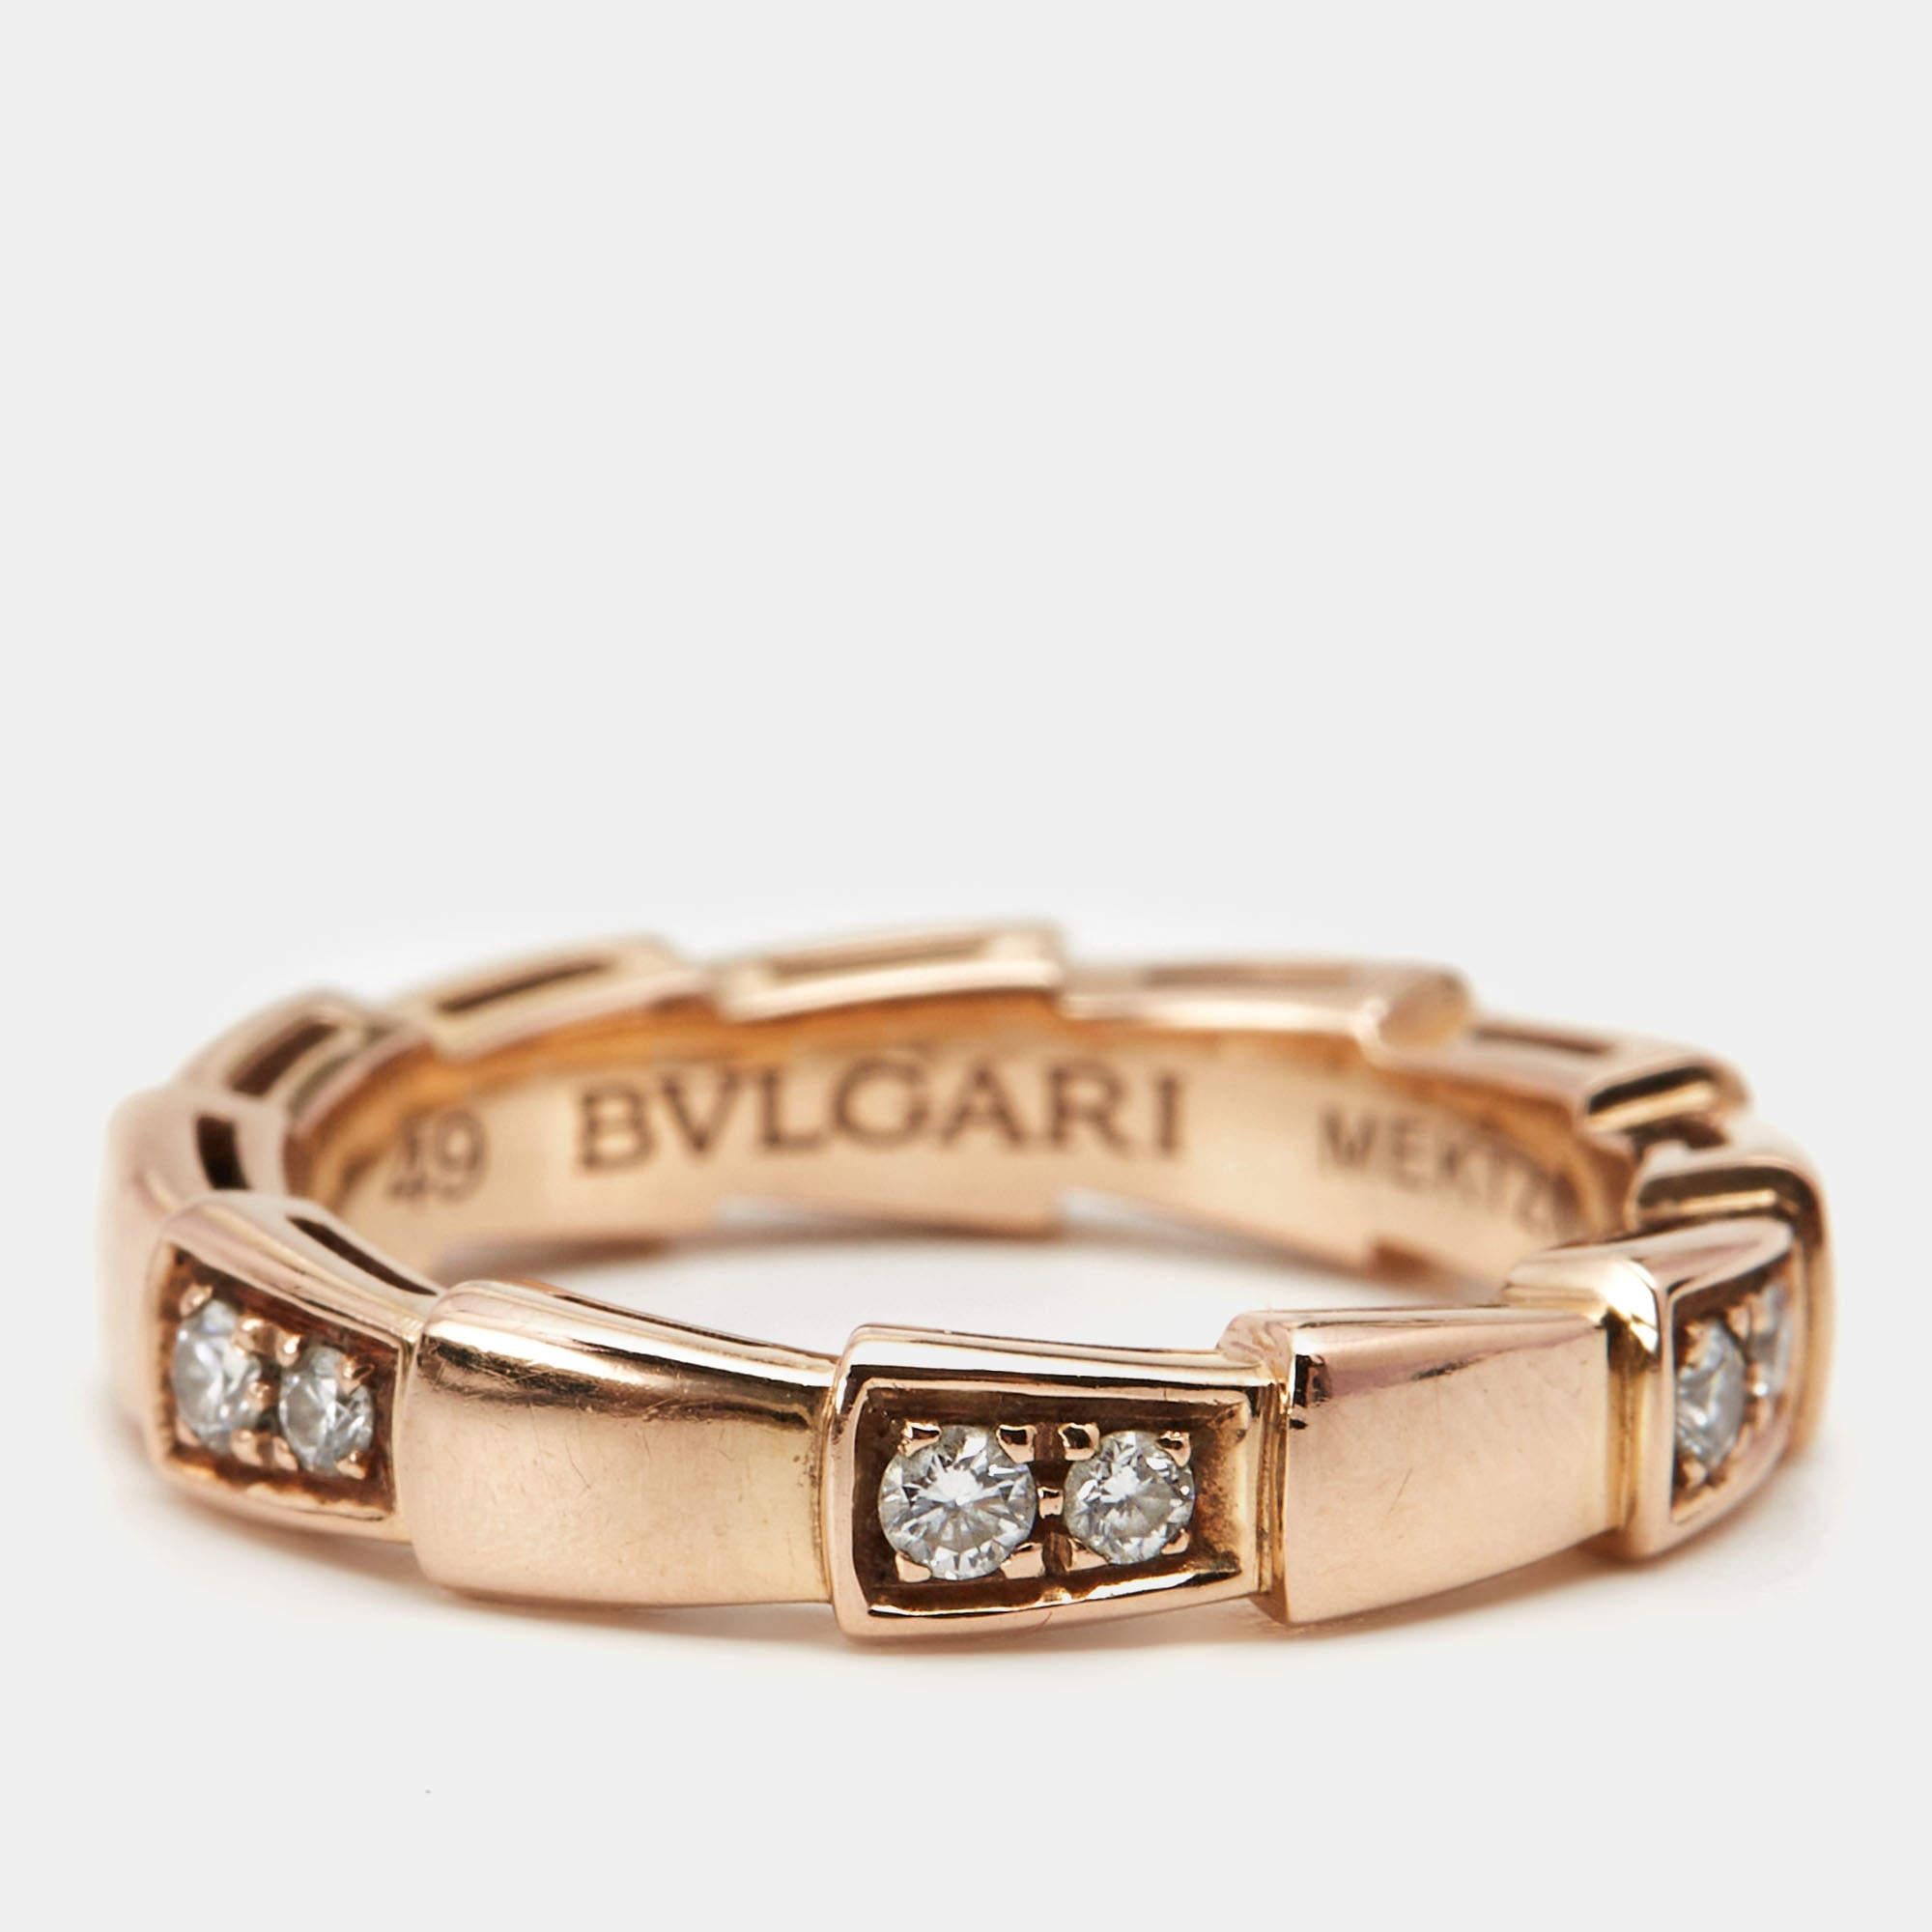 The choice of the best materials coupled with heritage artisanship makes this Bvlgari ring a creation worth cherishing. It sits gracefully on the finger.

